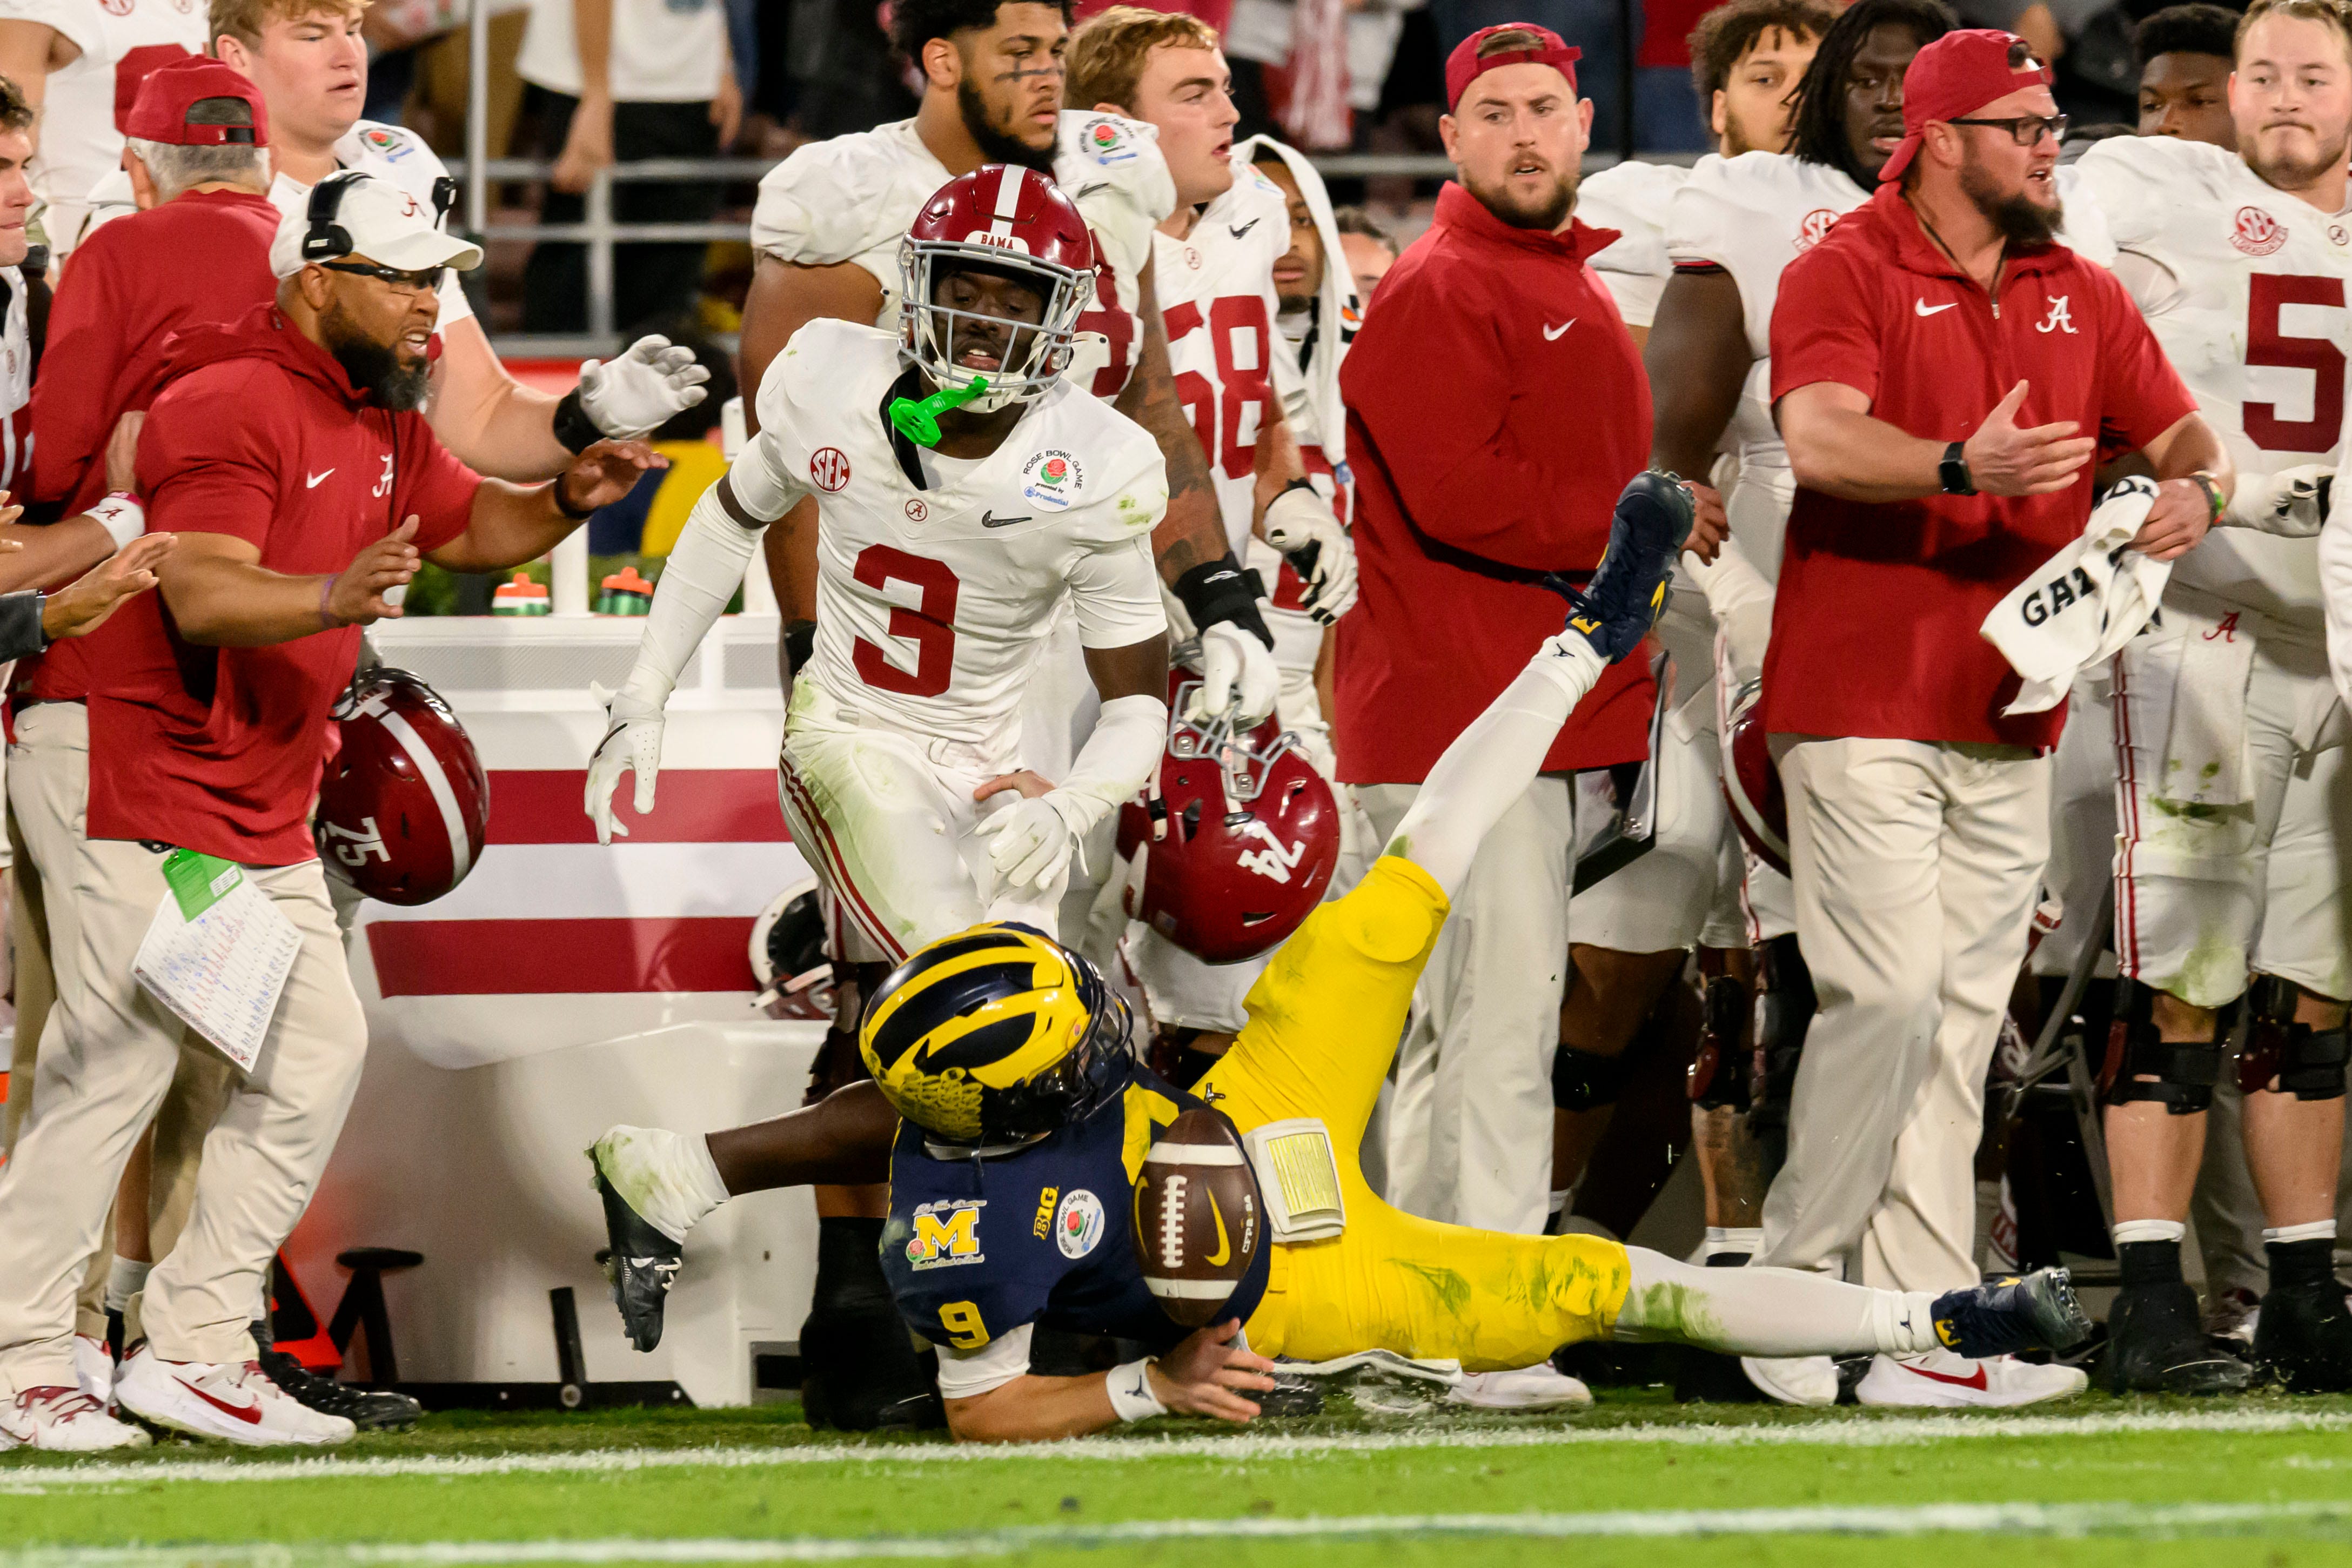 Michigan quarterback J.J. McCarthy hits the ground after running the ball during the fourth quarter of the Rose Bowl, in Pasadena, California, January 1, 2024.